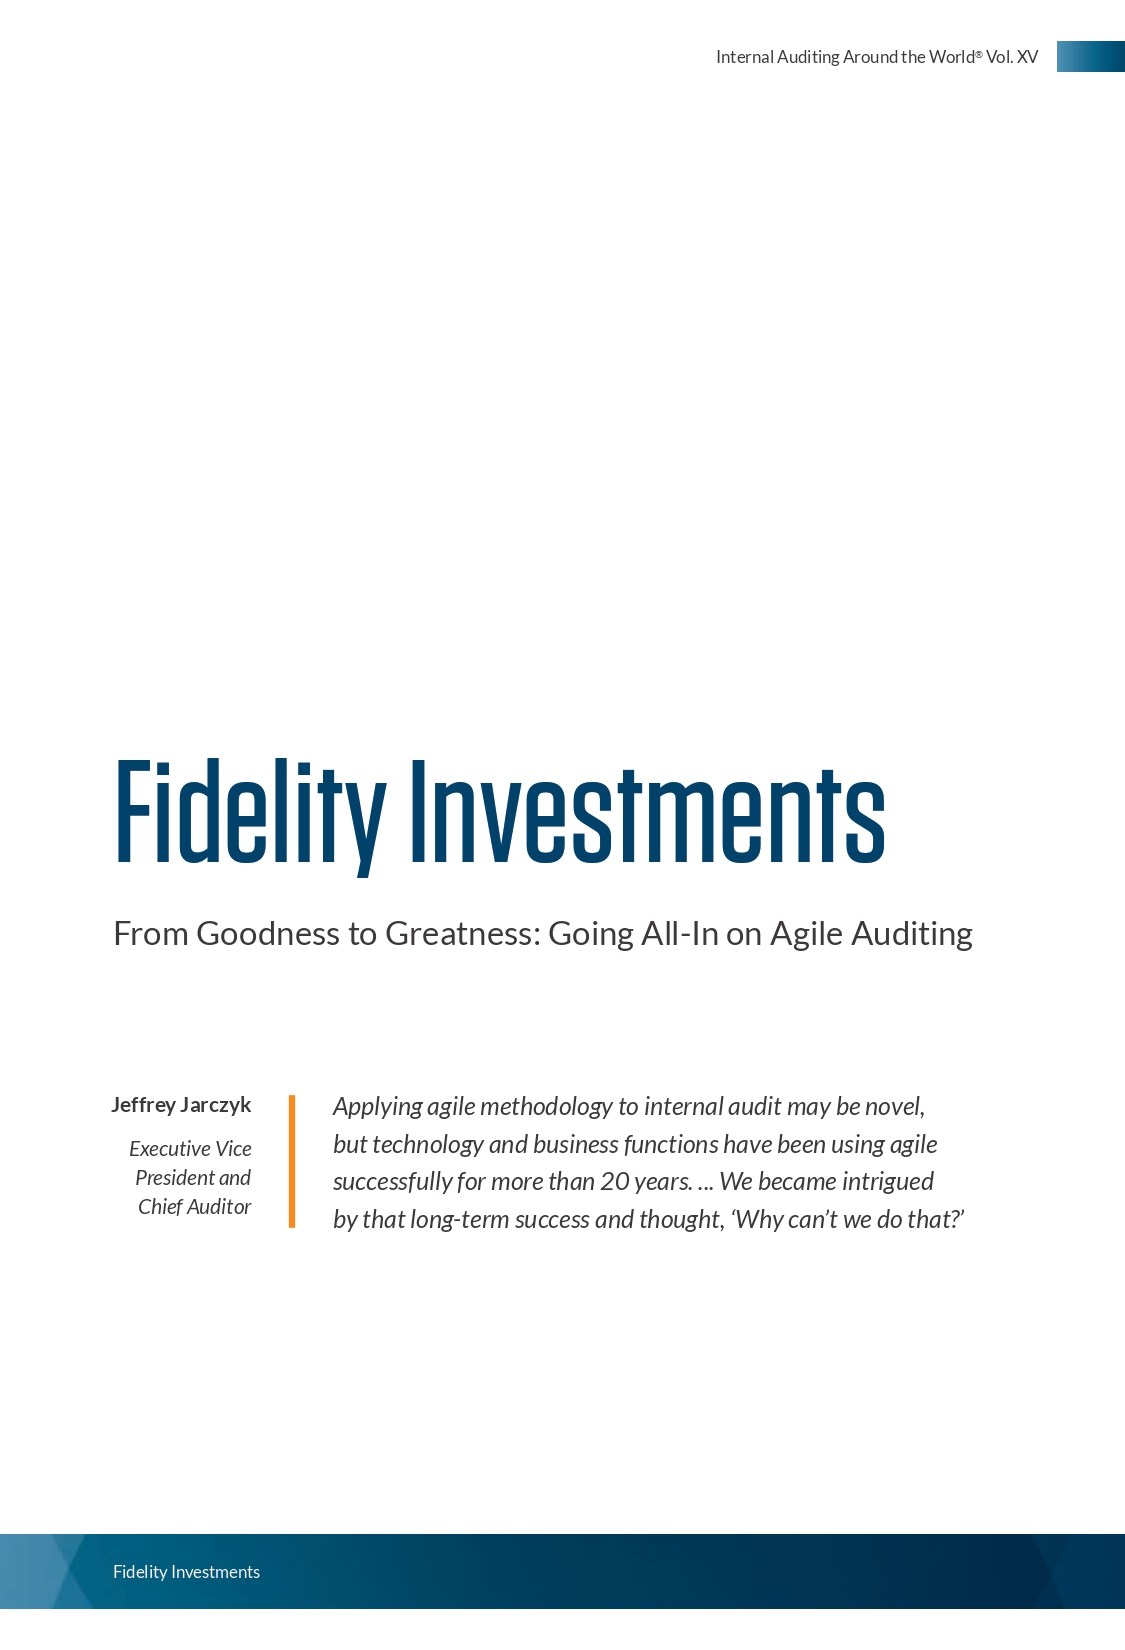 Screenshot of the first page of Fidelity Investments From Goodness to Greatness — Going All-In on Agile Auditing